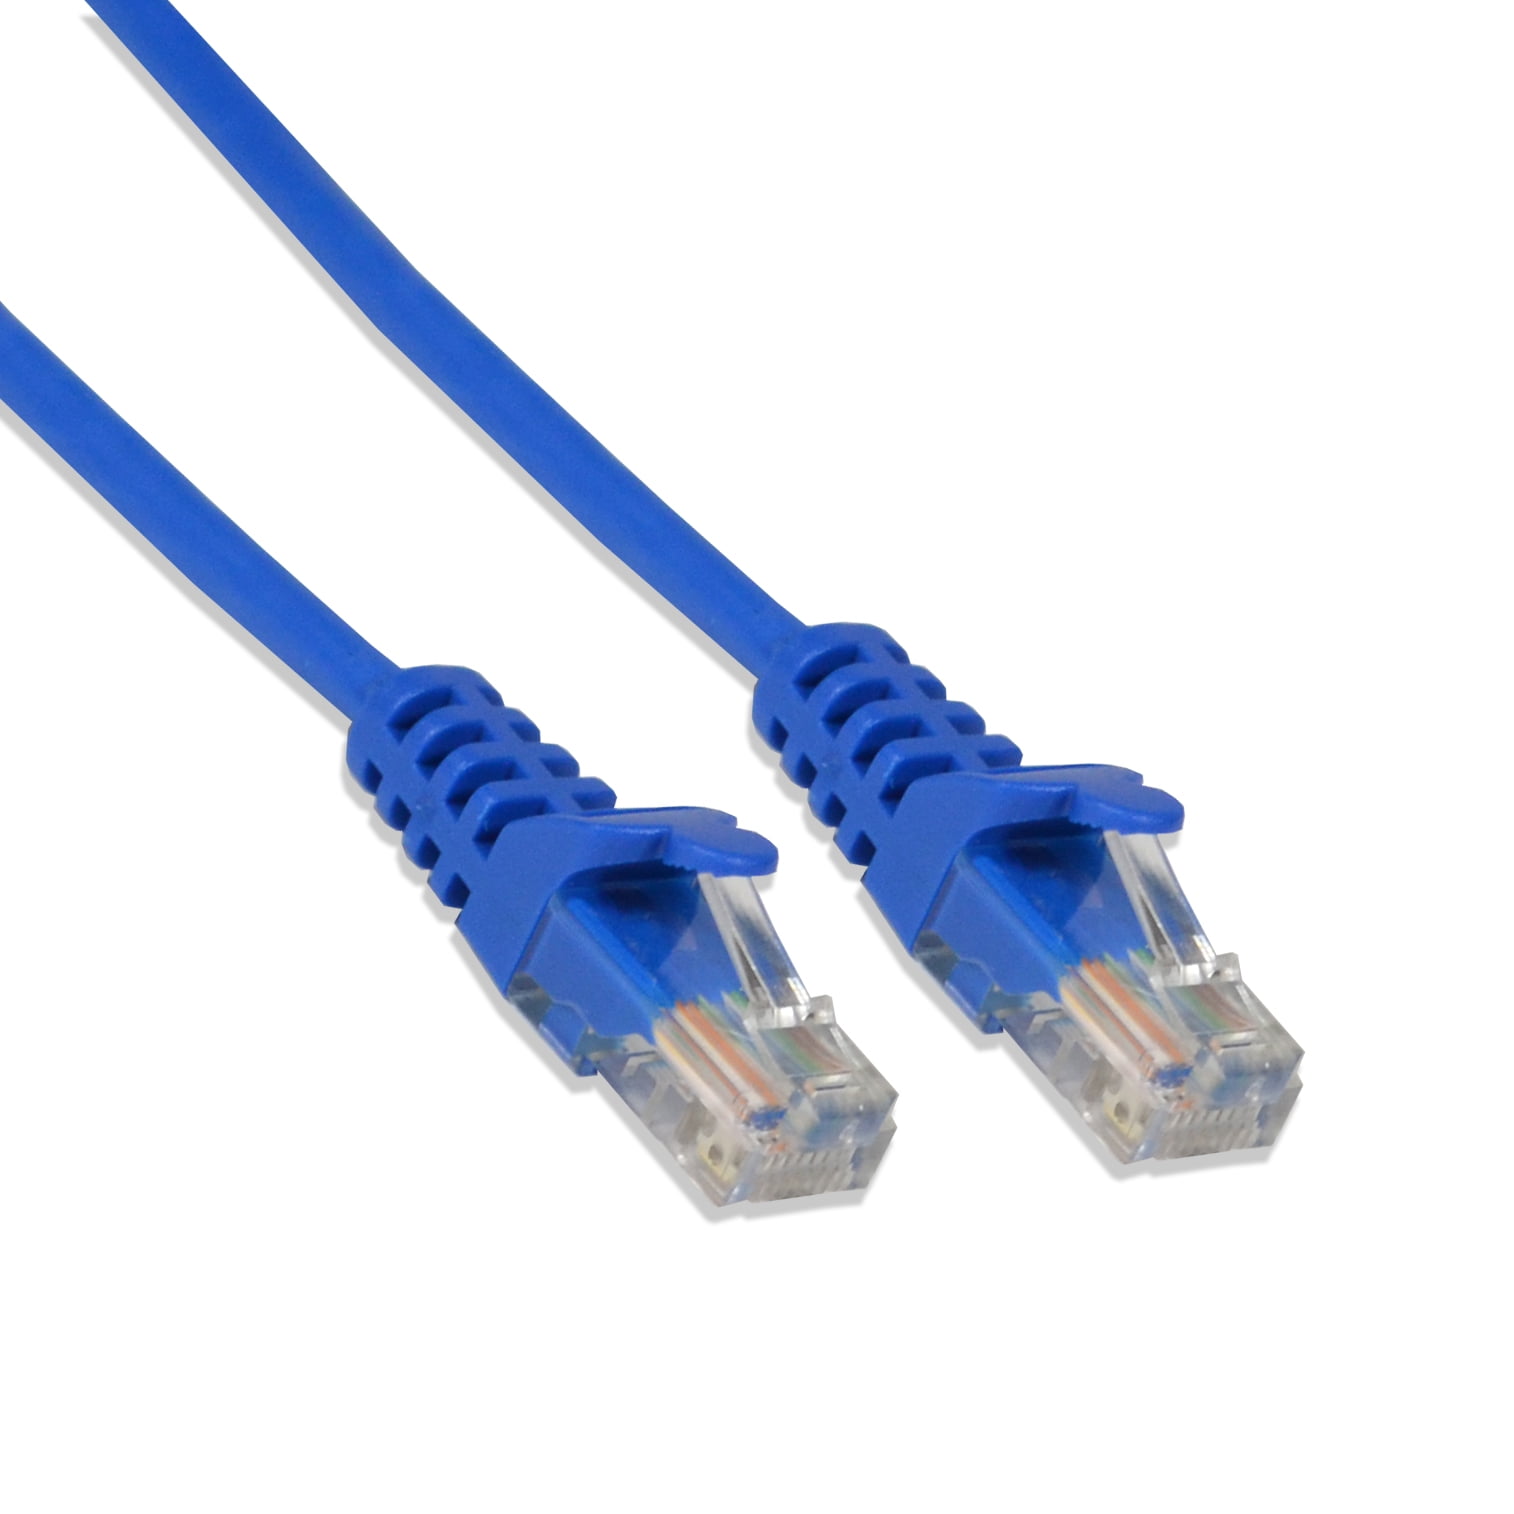 10 Pack Lot Qty GIGA LAN 6 FEET 'ft CAT6 Ethernet Patch Cable Cord 550 MHz RJ45 